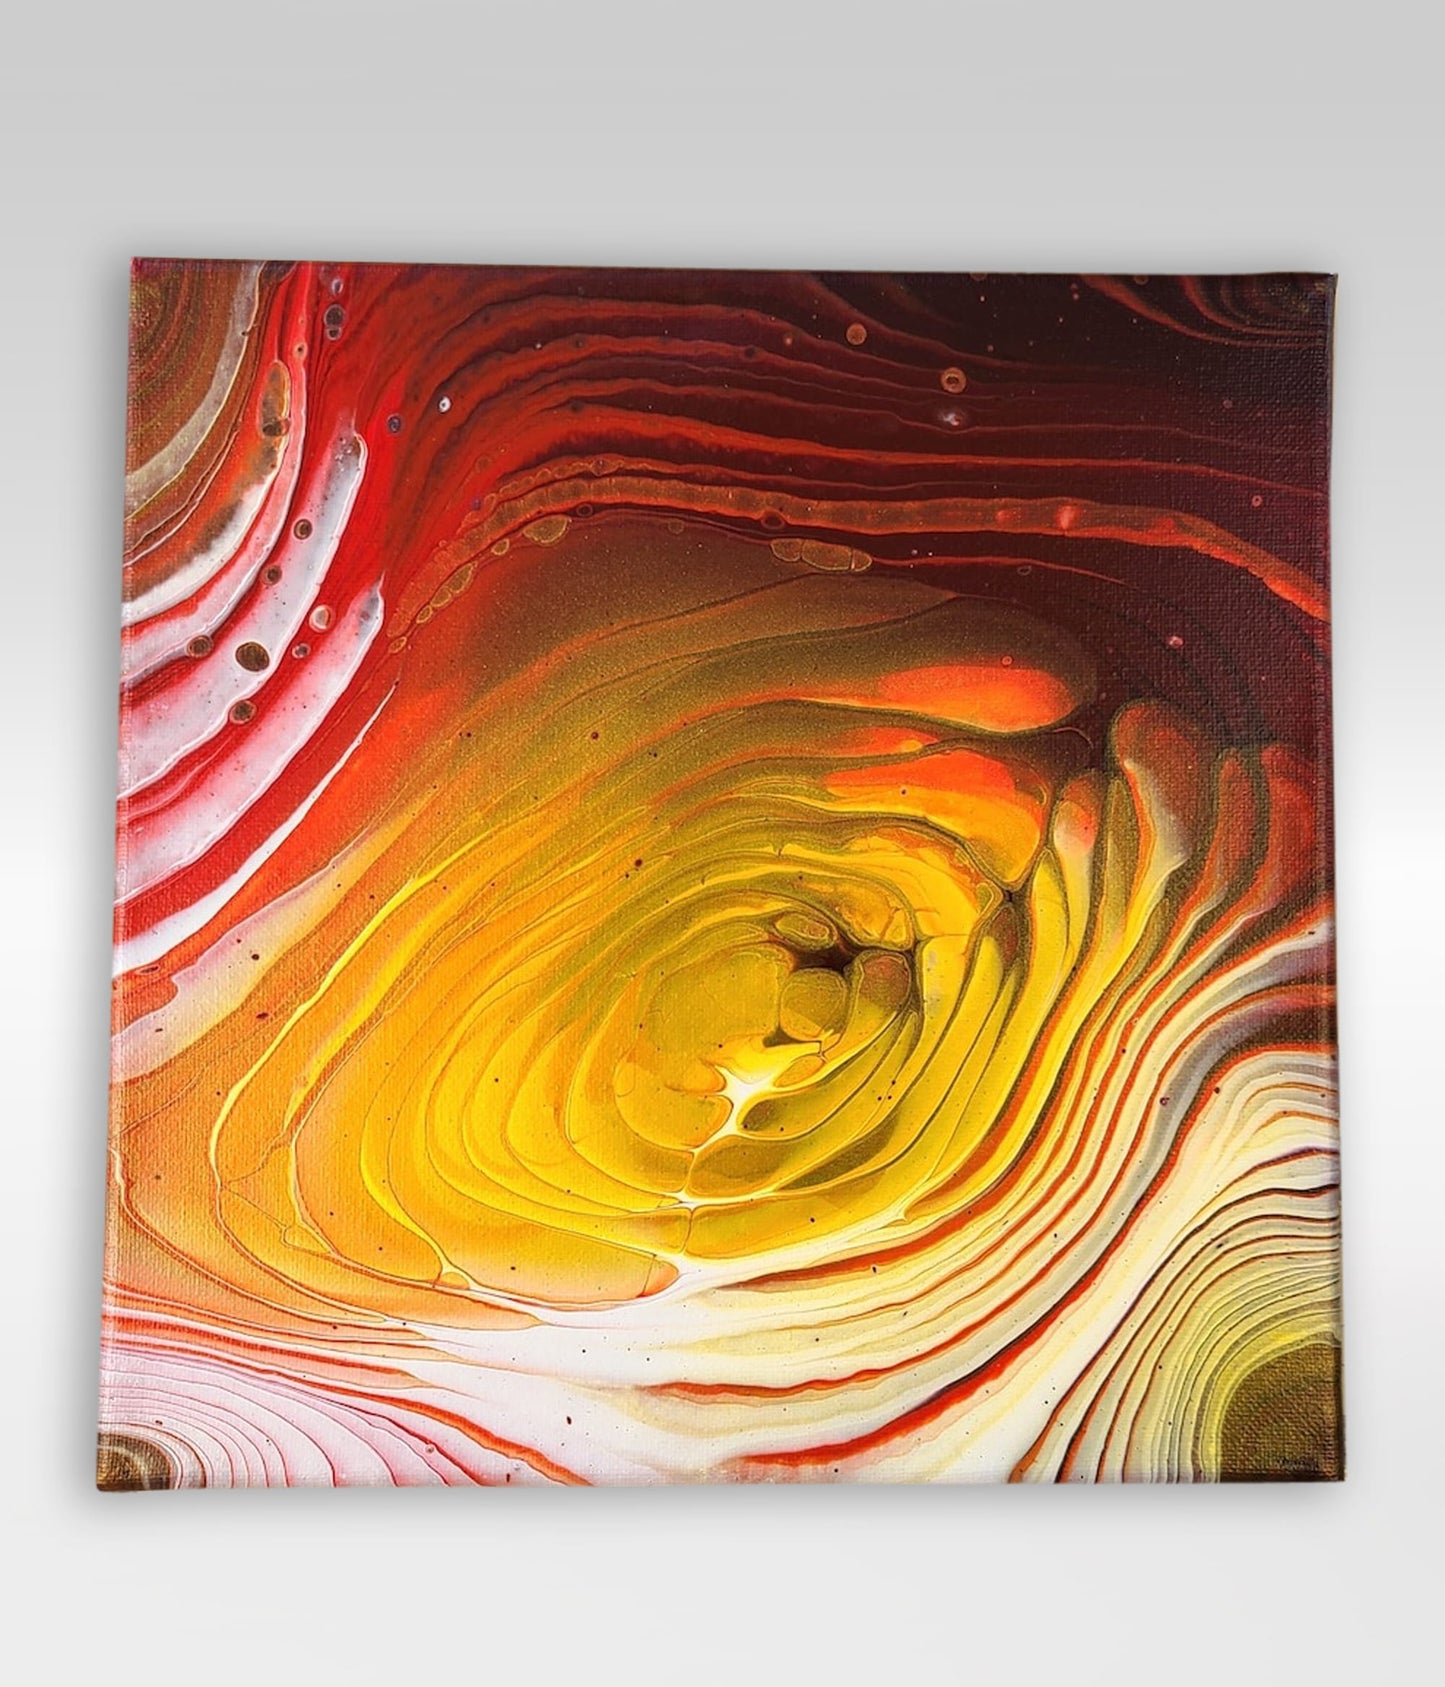 Incubation – 10 x 10 Acrylic Pour Painting On Canvas